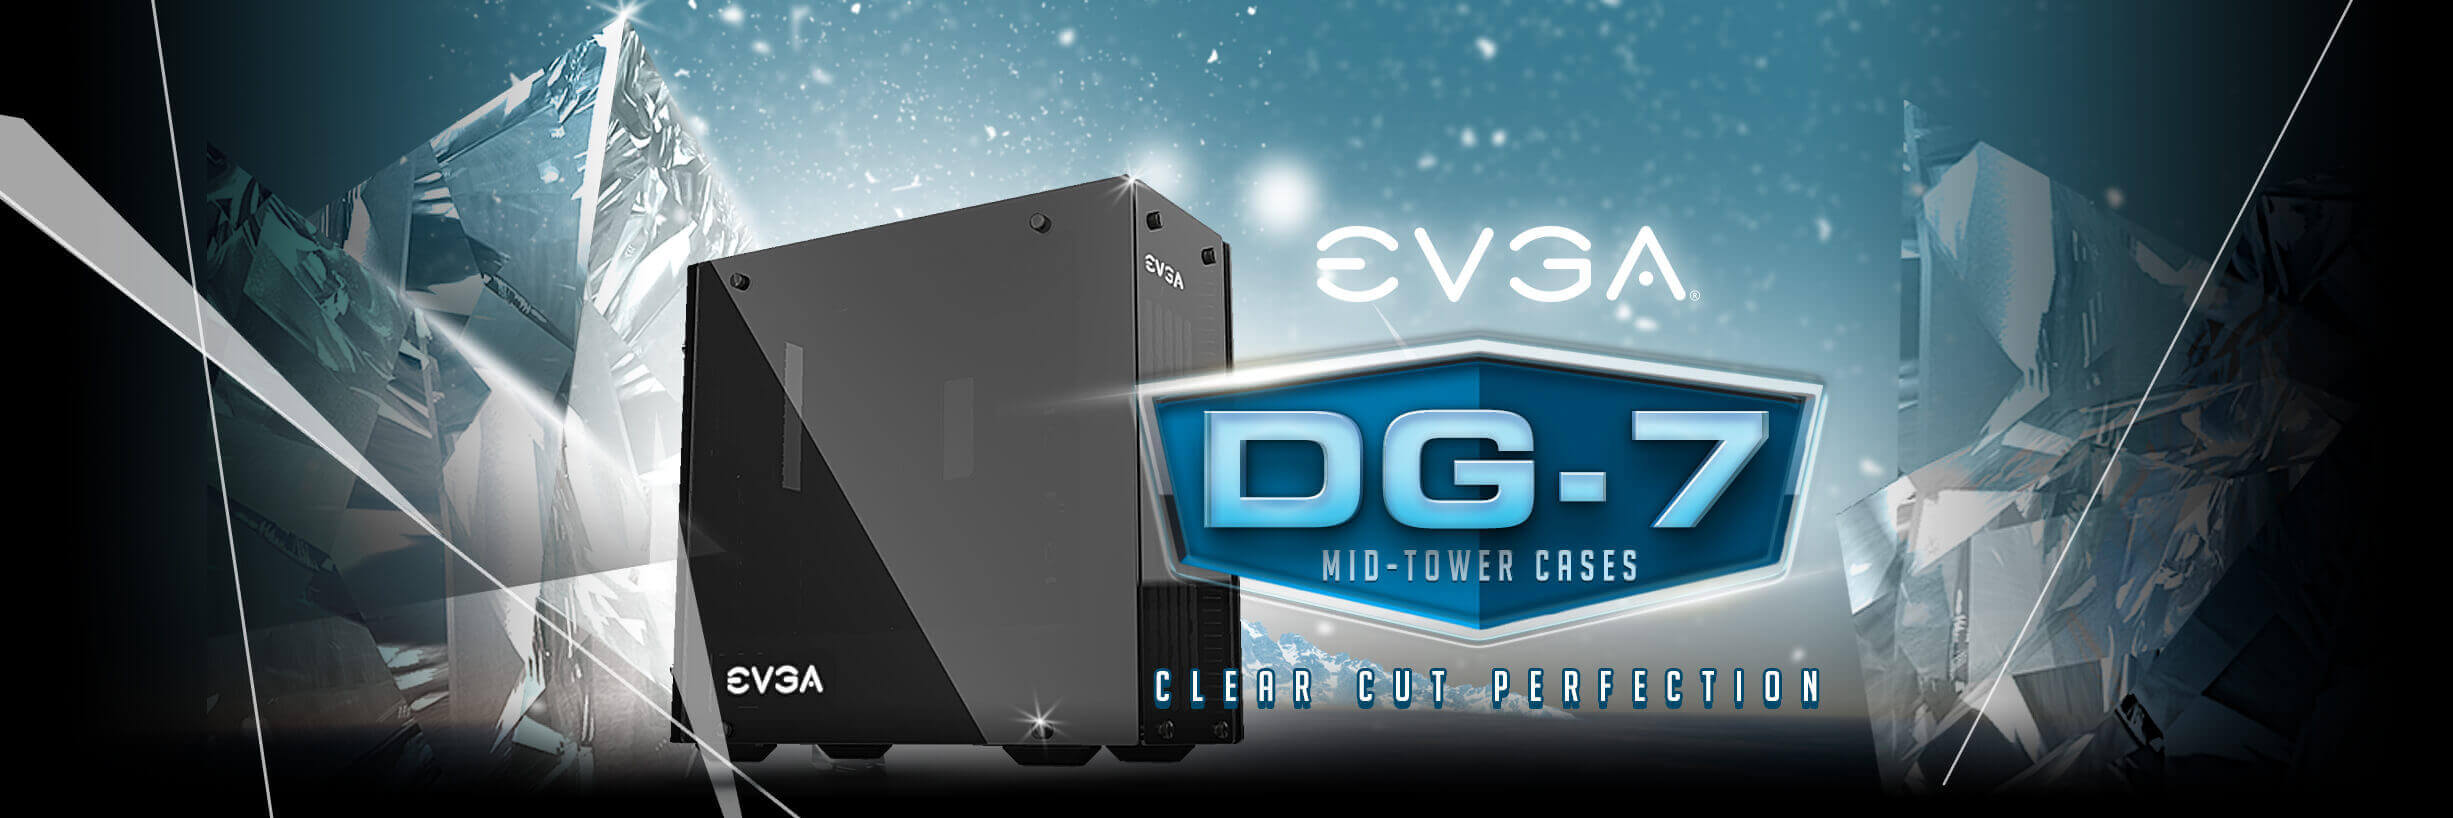 EVGA DG-7 Mid-Tower Cases Coming Soon